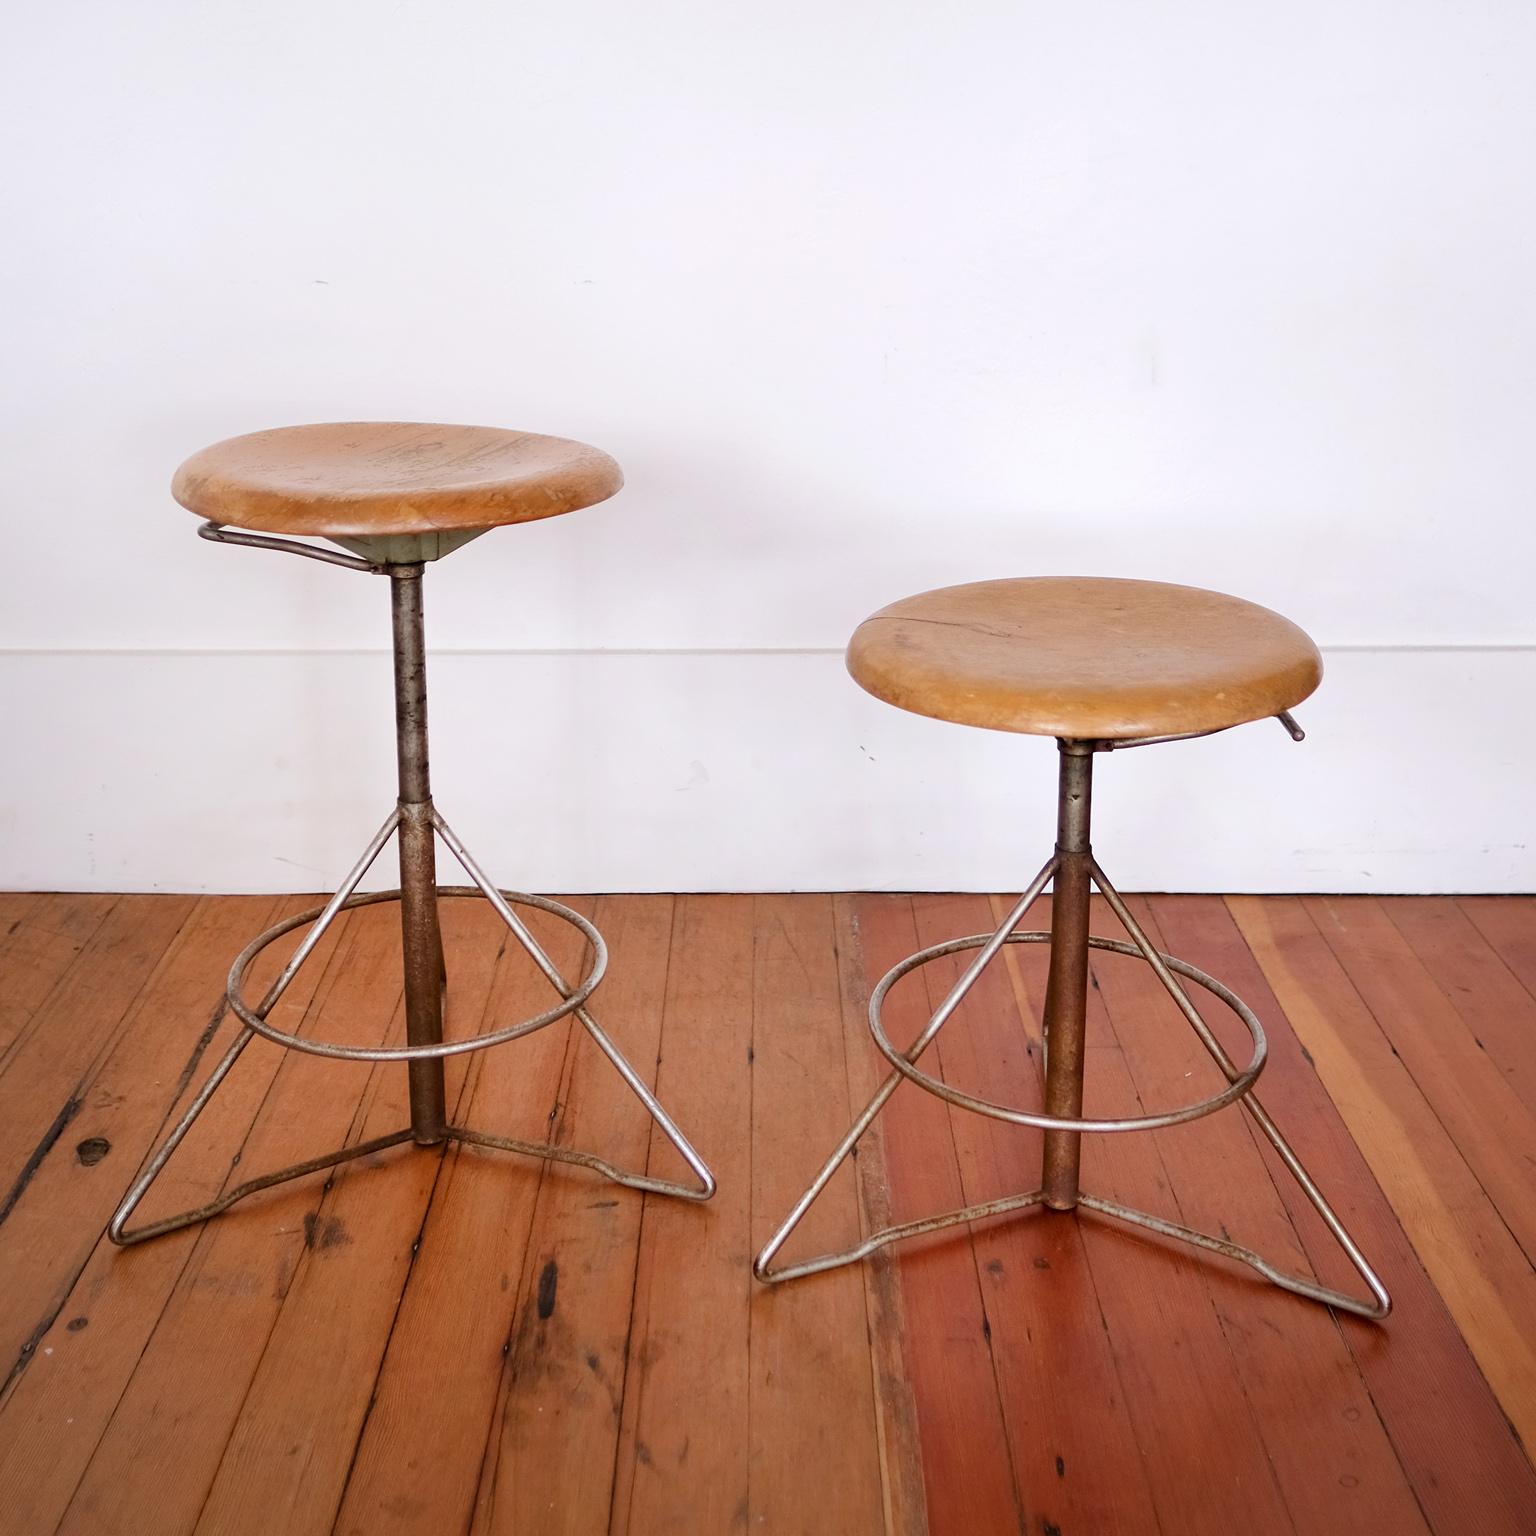 Swedish Elias Svedberg Up and Down Industrial Stool Sweden, 1950s For Sale